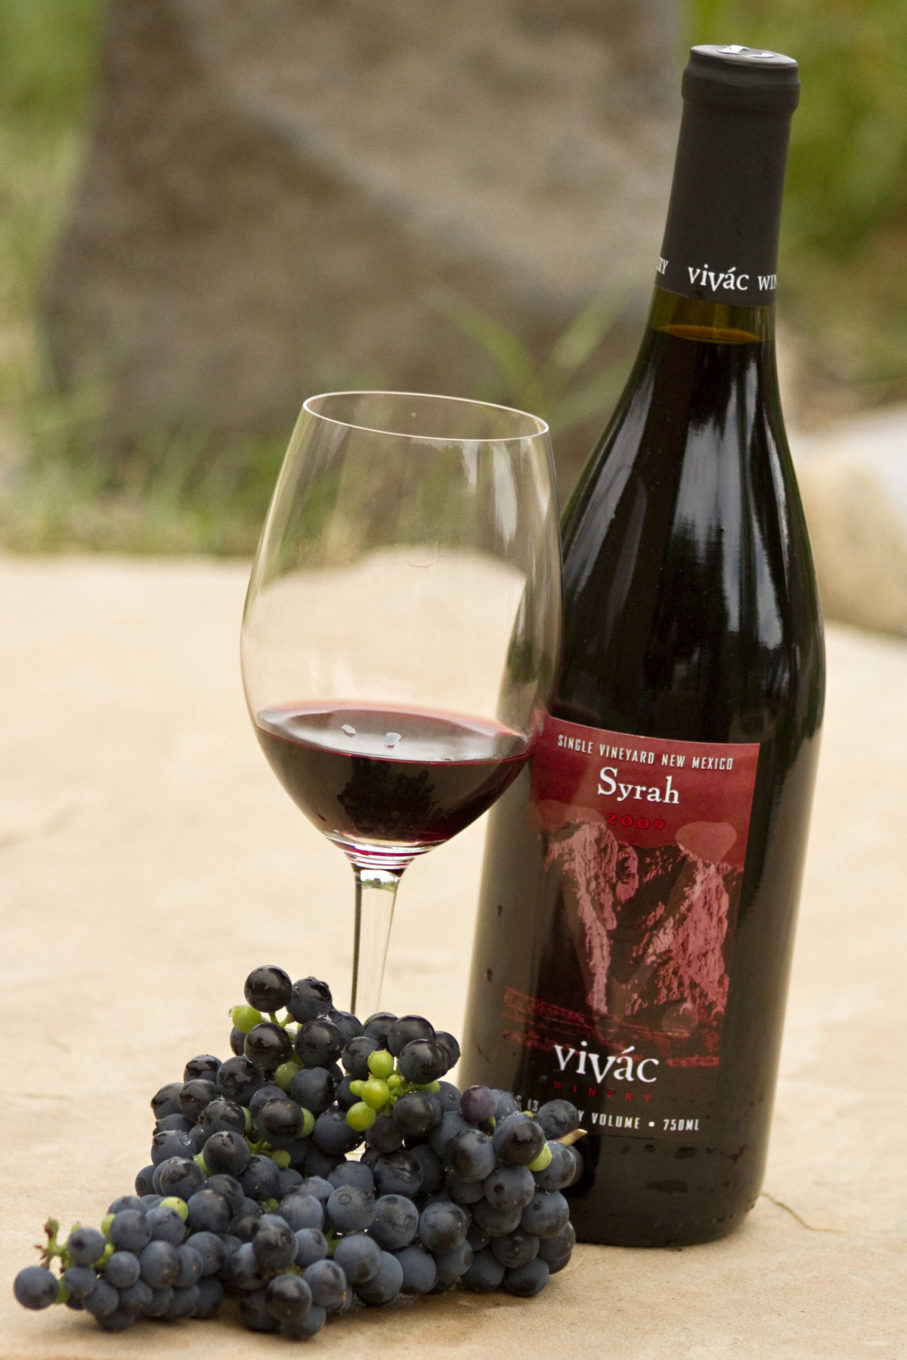 Vivac wine during new mexico wine tours